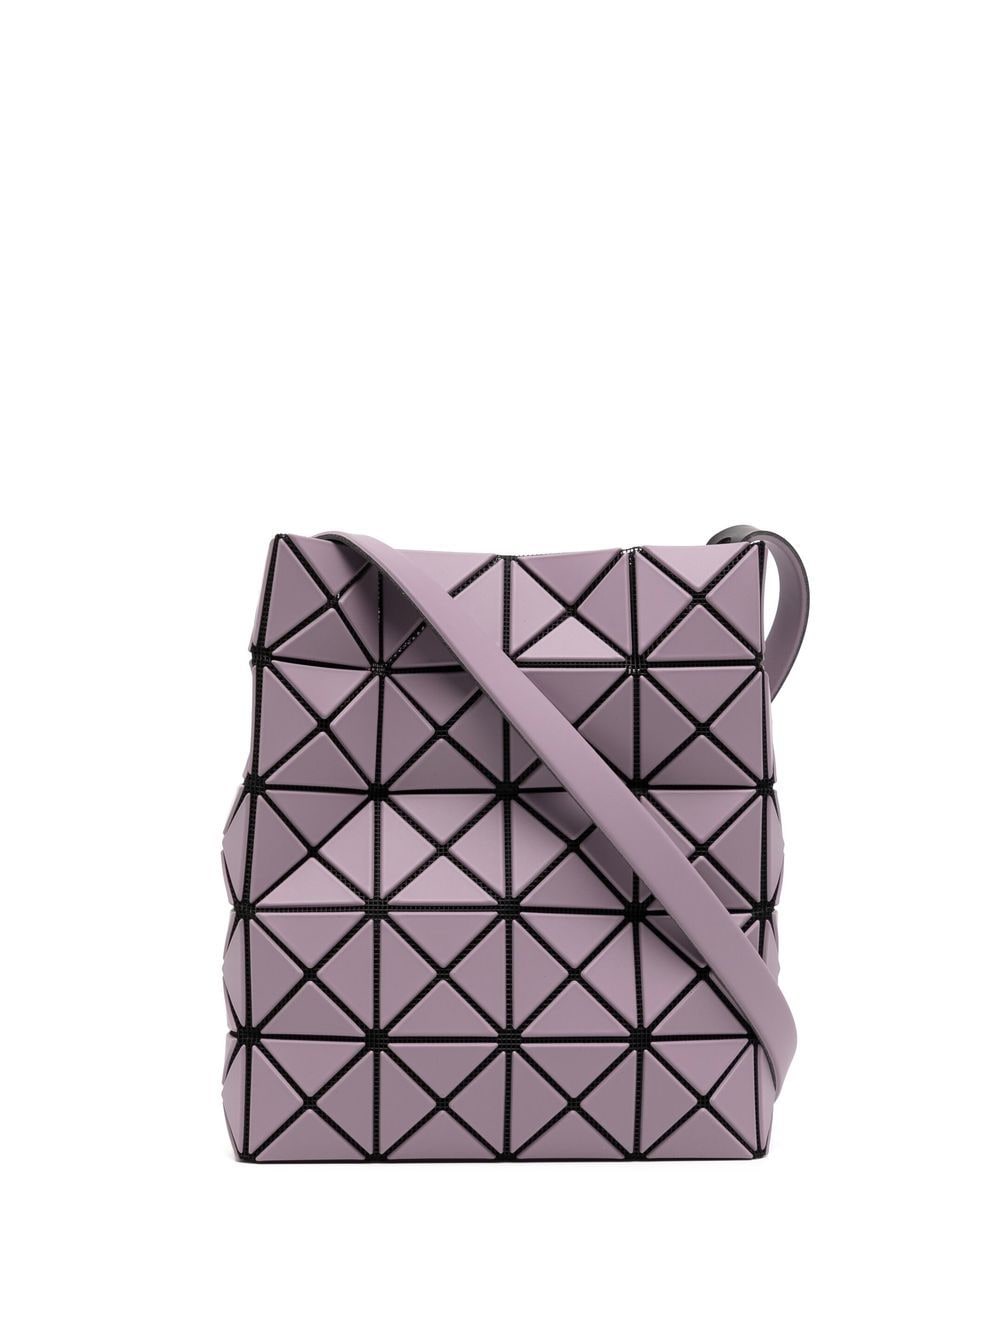 PRISM FROST CROSSBODY BAG  The official ISSEY MIYAKE ONLINE STORE